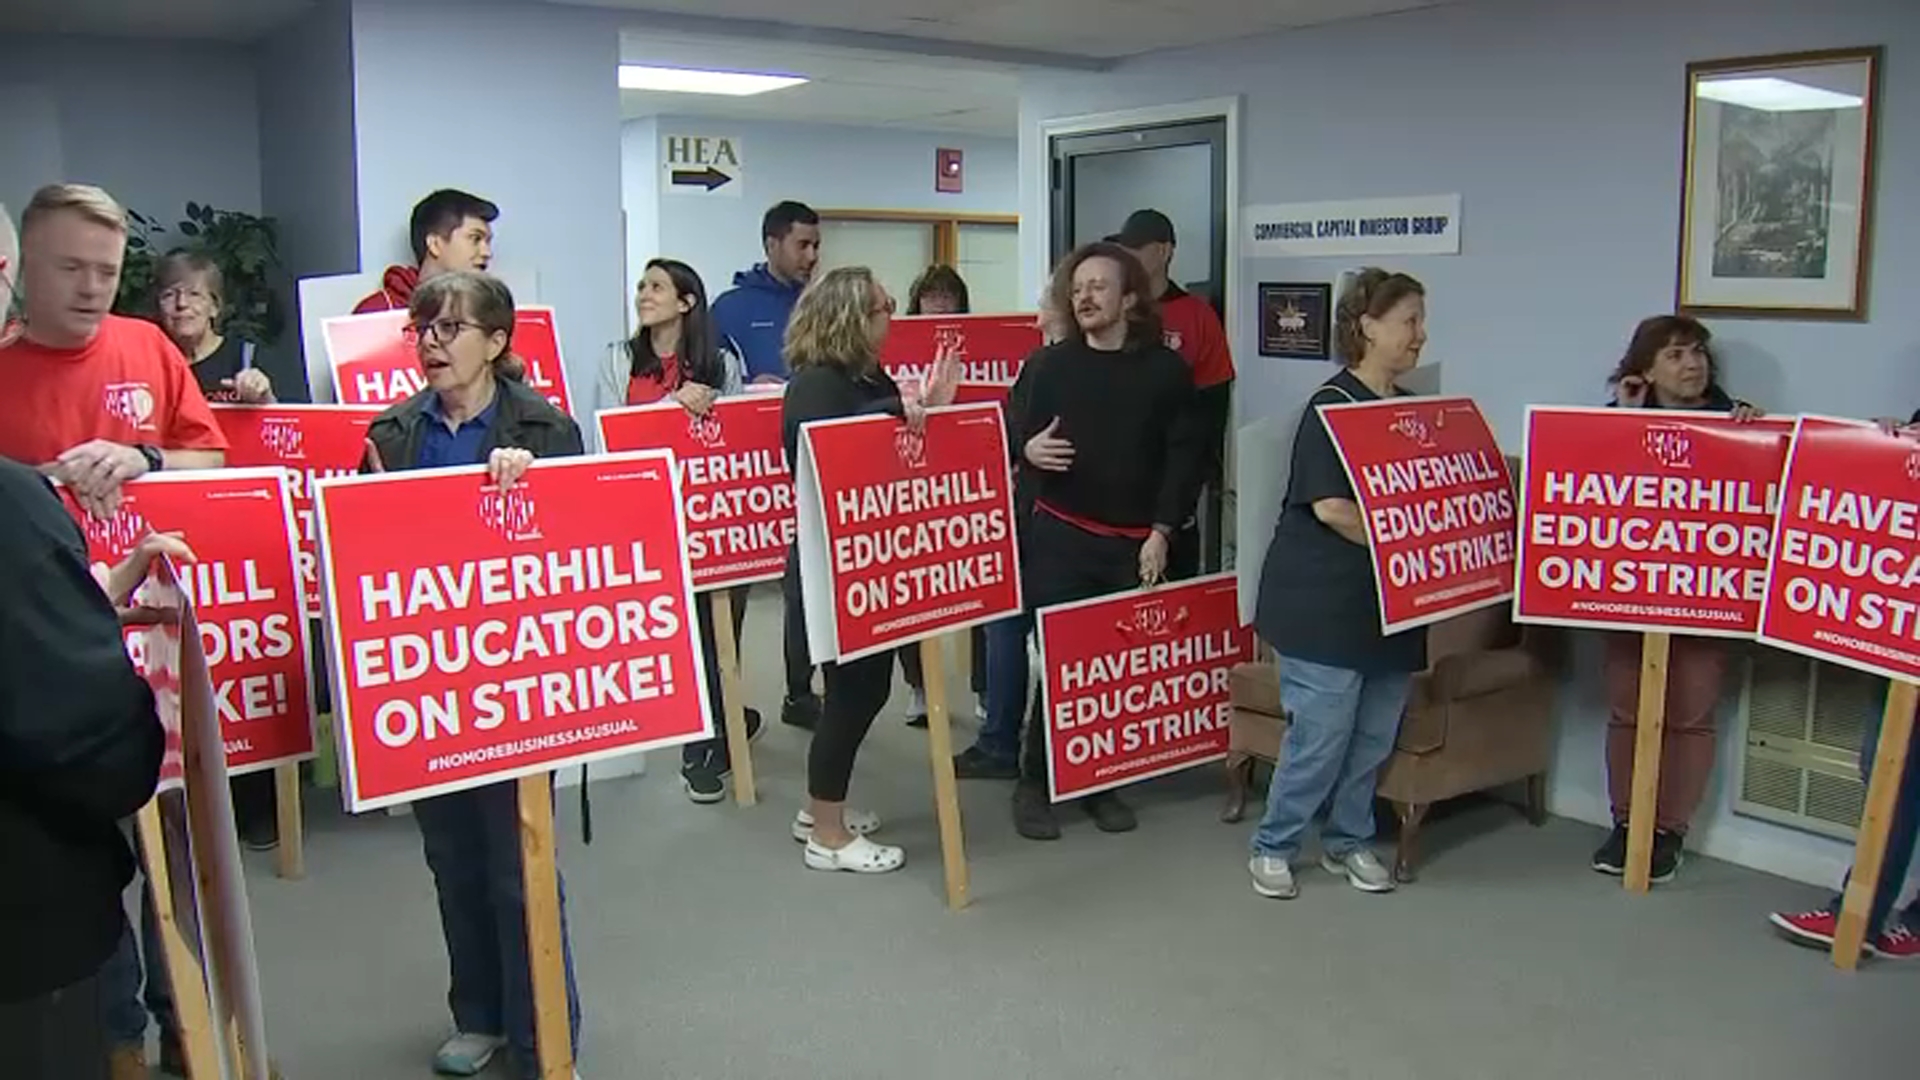 Teachers in Two Mass. Communities on the Verge of a Strike